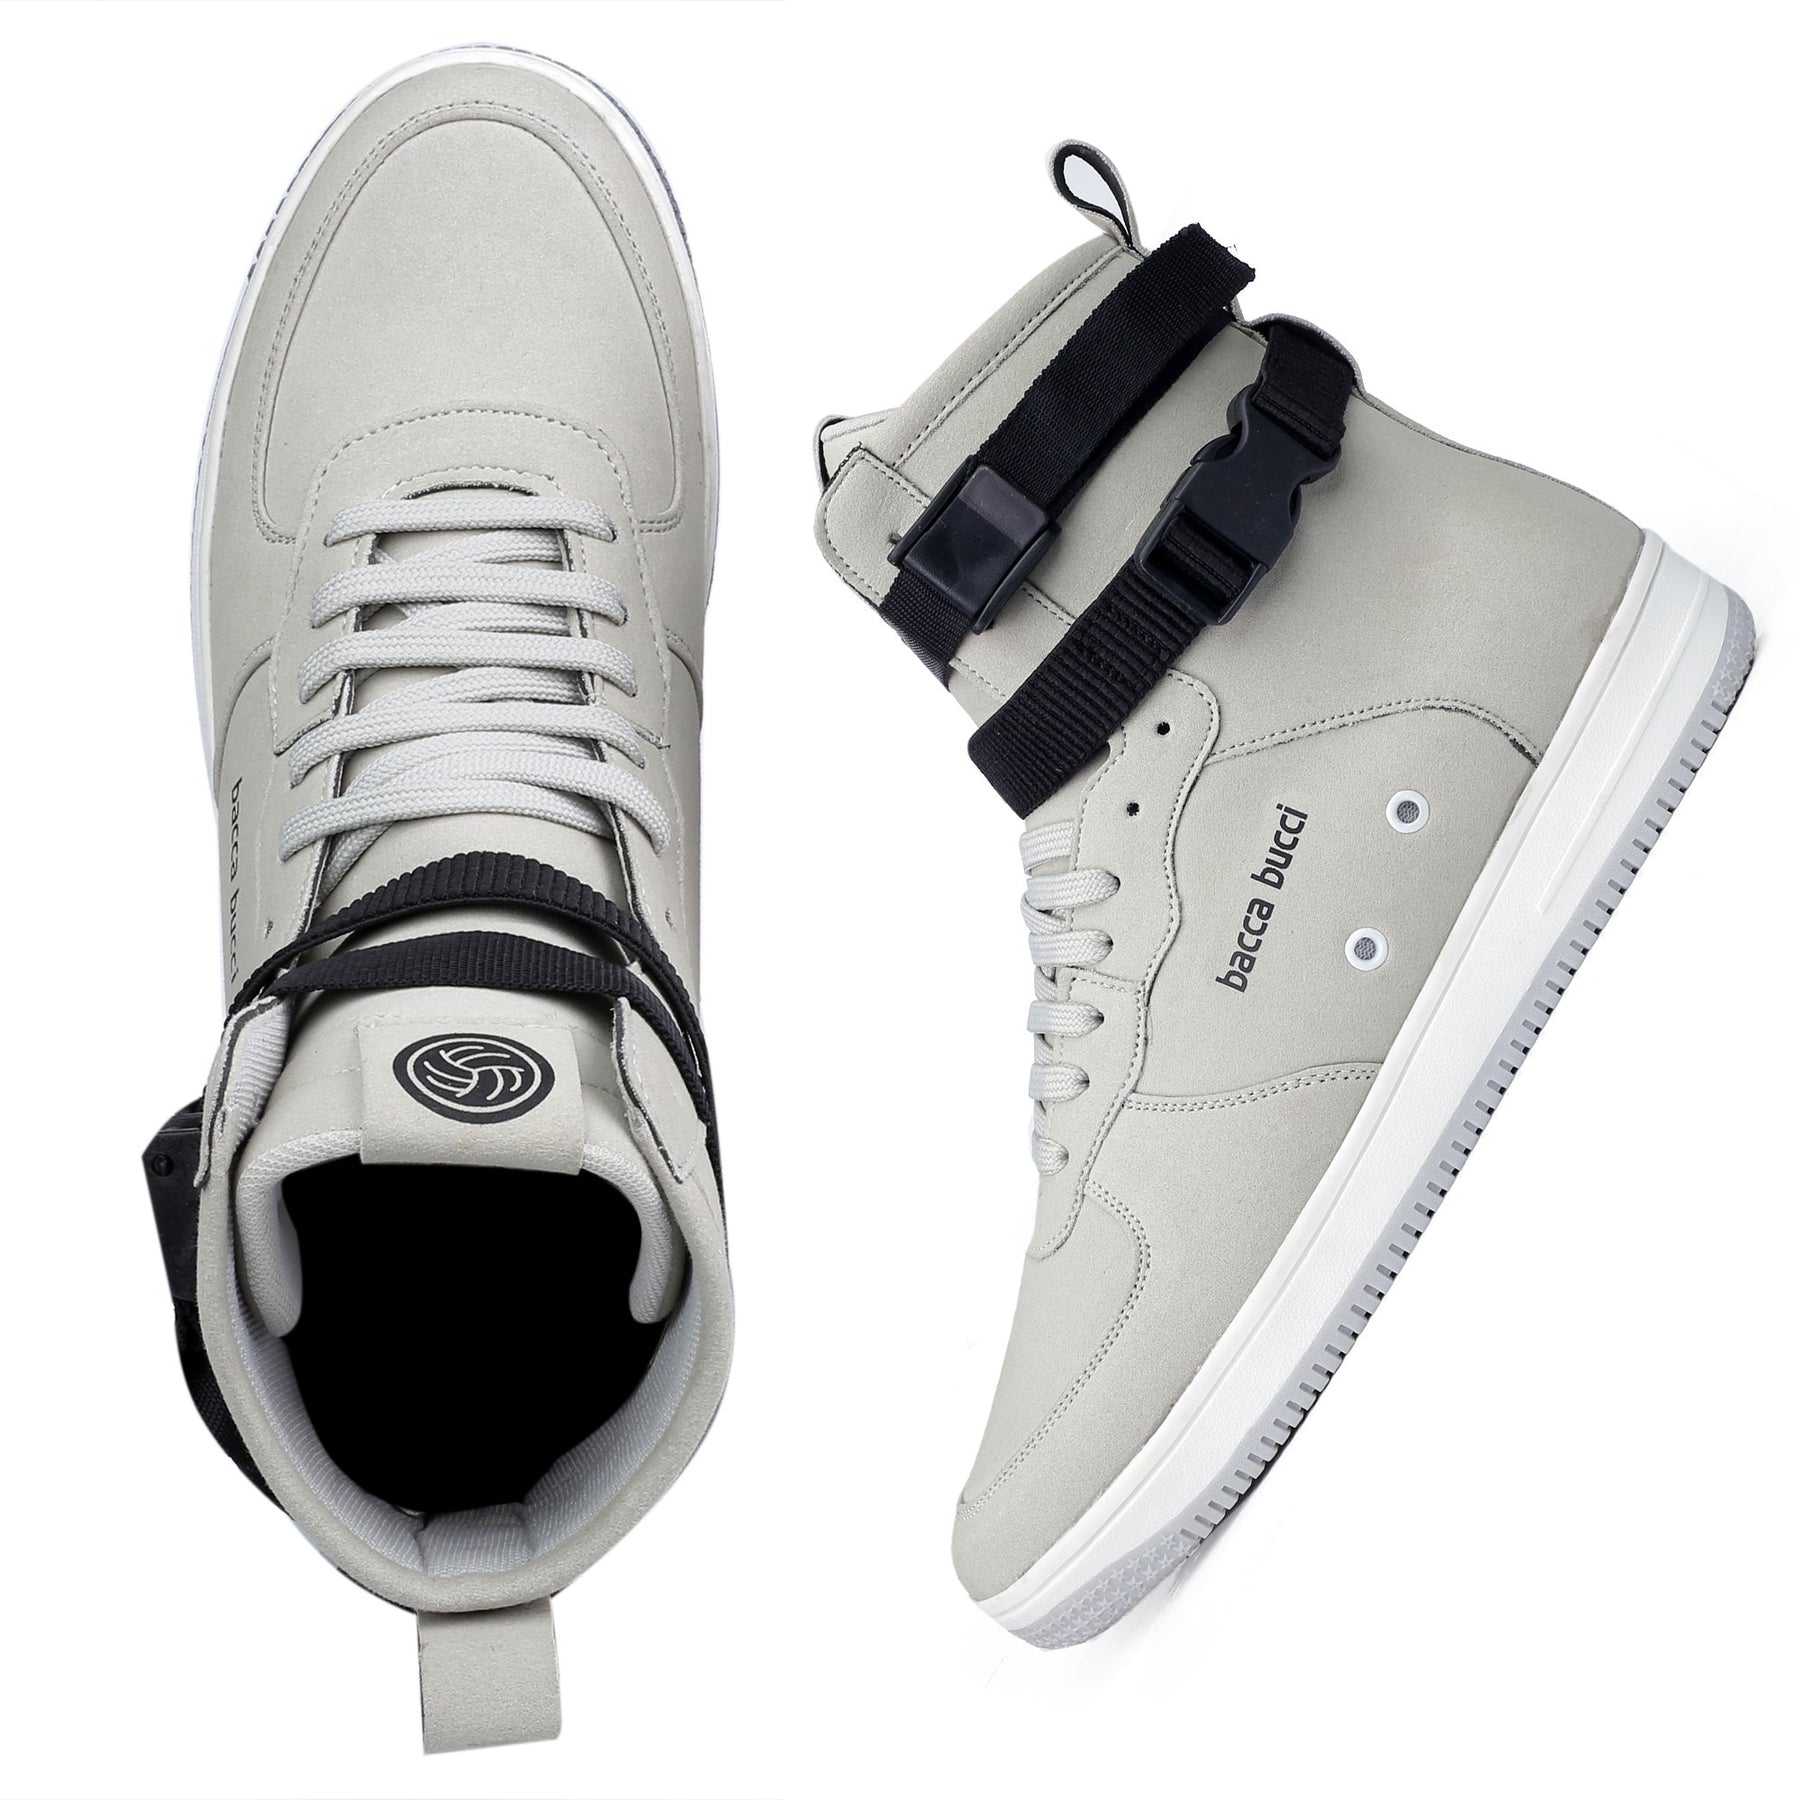 high top white sneakers, white sneakers for men, mens fashion sneakers, best white sneakers for men